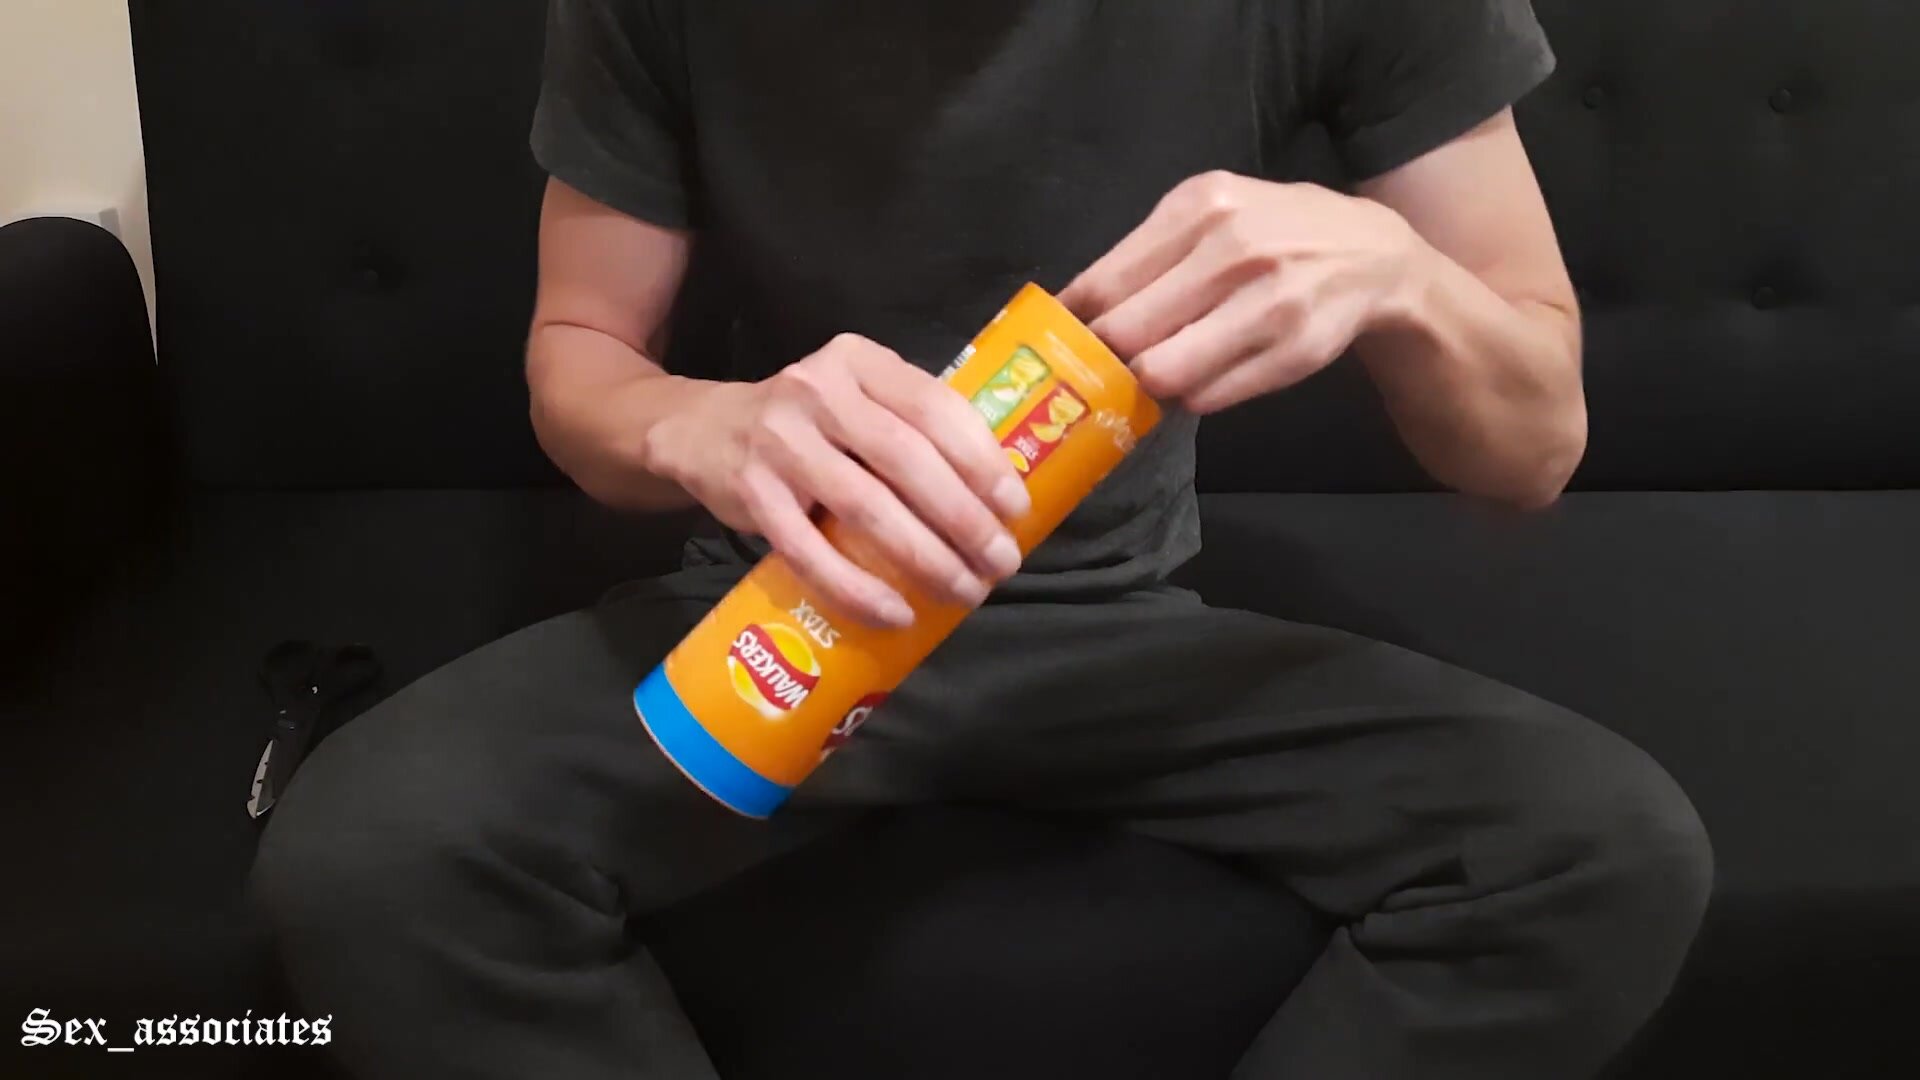 Sex_Associates - Prank with the Pringles can or how to trick (fool) your girlfriend. Step by step guide (instruction)